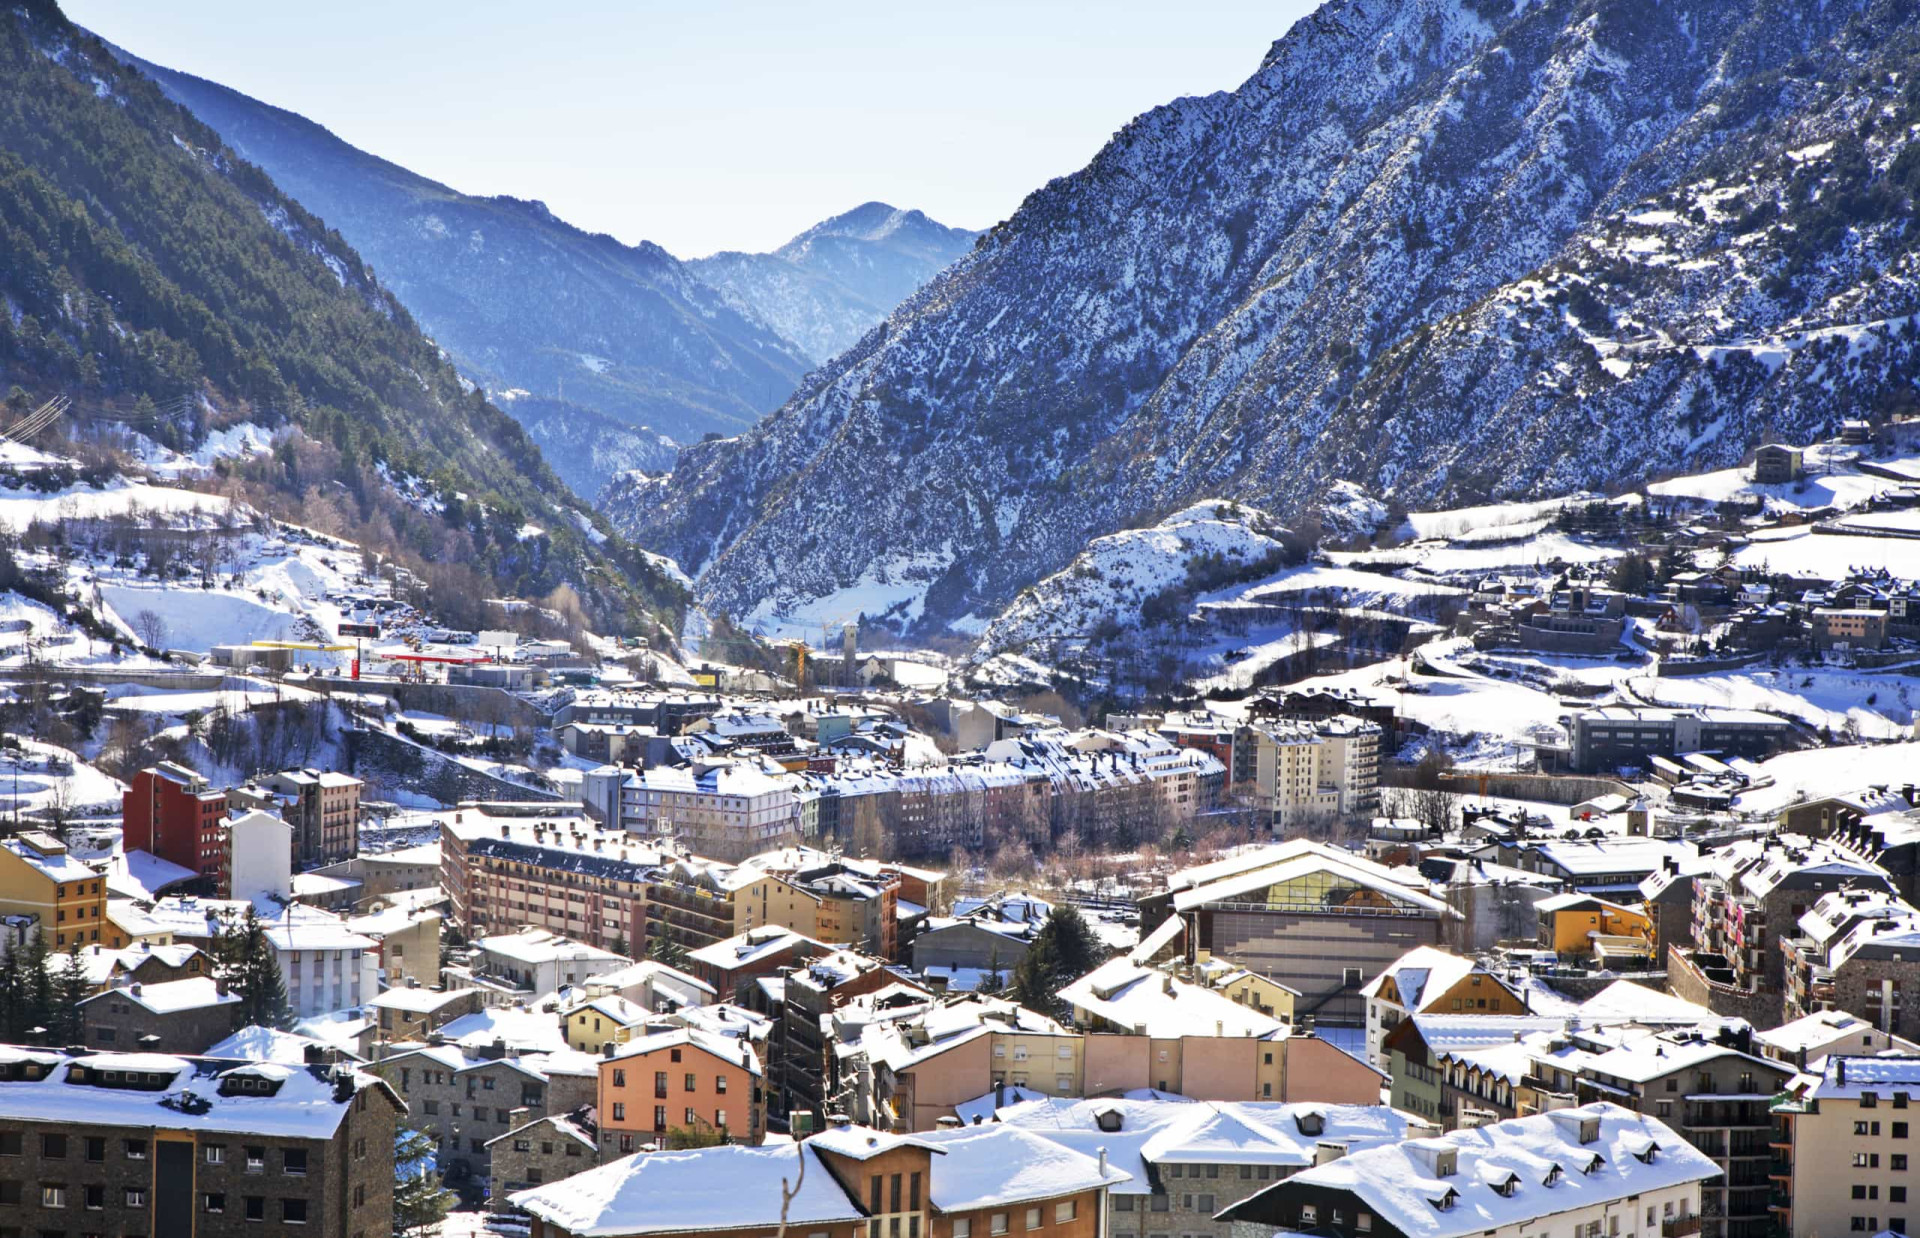 <p>The picturesque town of Encamp is an essential stop during any visit to Andorra. Settled in almost the exact center of the country, Encamp is home to many cozy cafés and shops, and is also home of the National Automobile Museum.</p><p><a href="https://www.msn.com/en-za/community/channel/vid-7xx8mnucu55yw63we9va2gwr7uihbxwc68fxqp25x6tg4ftibpra?cvid=94631541bc0f4f89bfd59158d696ad7e">Follow us and access great exclusive content every day</a></p>